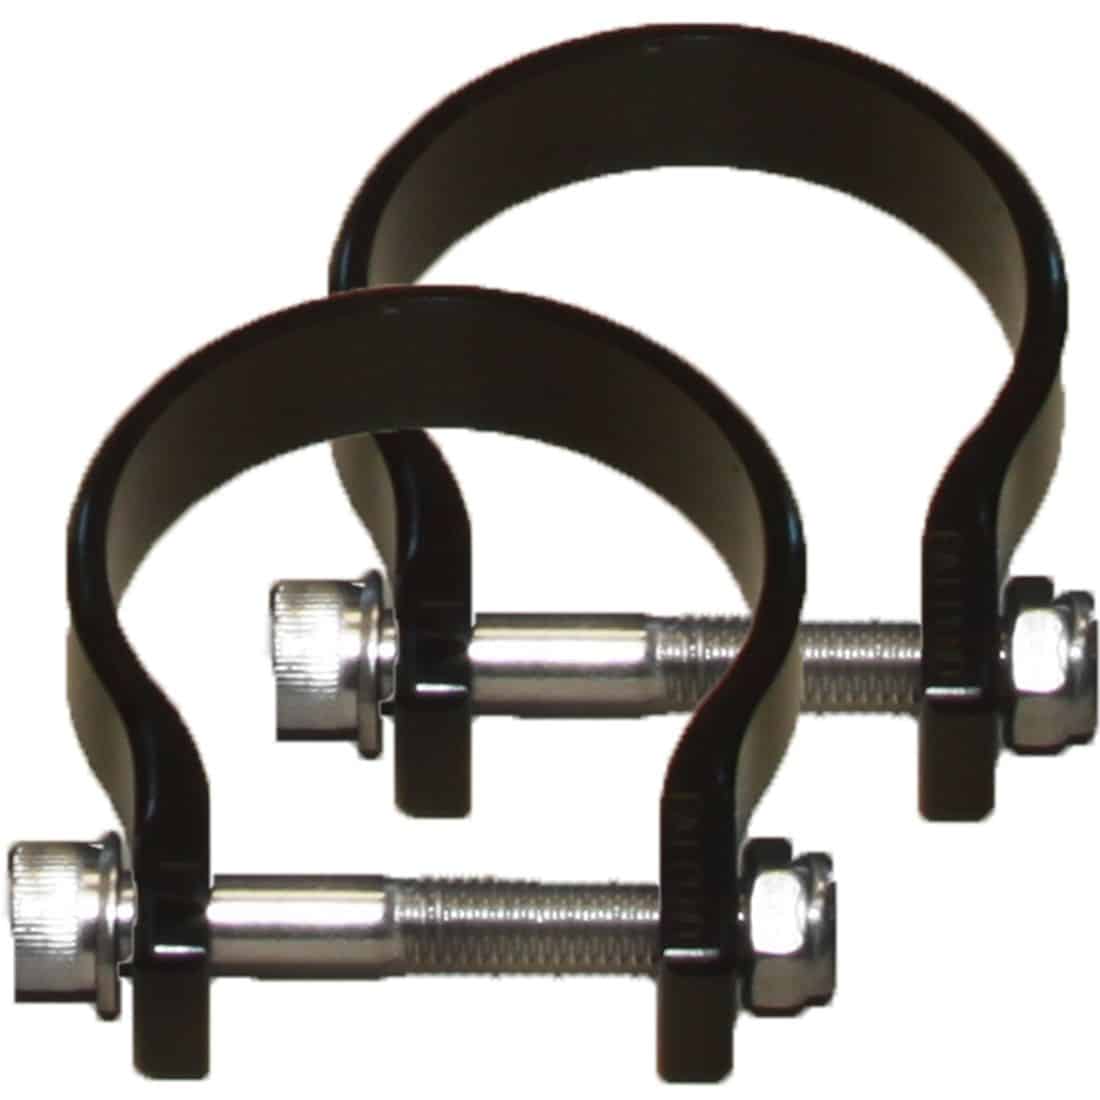 1.875 Inch Bar Clamp Fits E-Series and SR-Series RIGID Lighting 48720